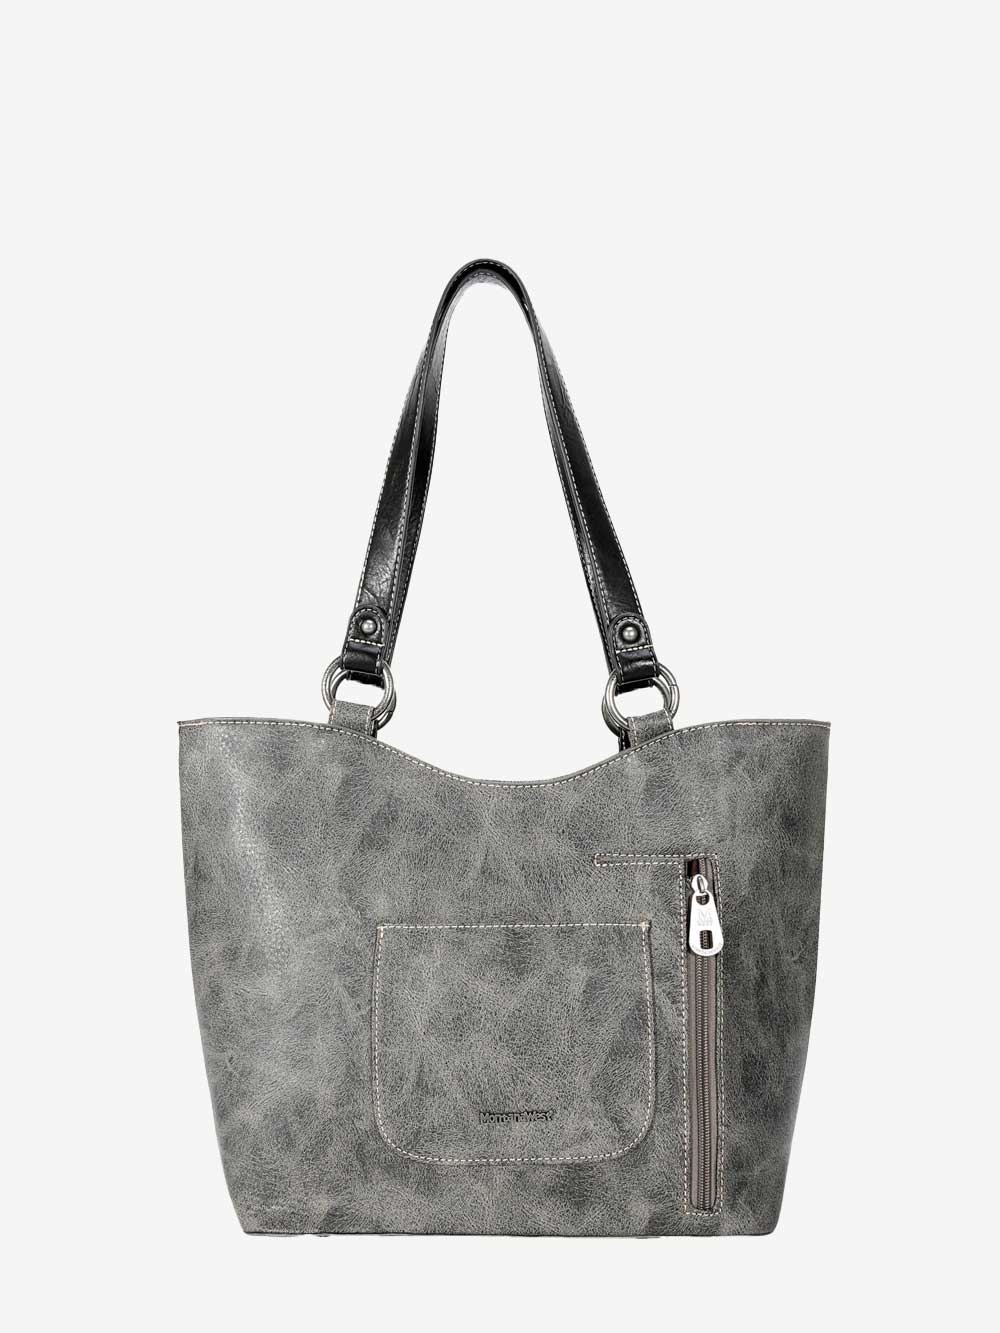 (Sale) Montana West Cut-Out Boot Scroll Concealed Carry Tote - Montana West World